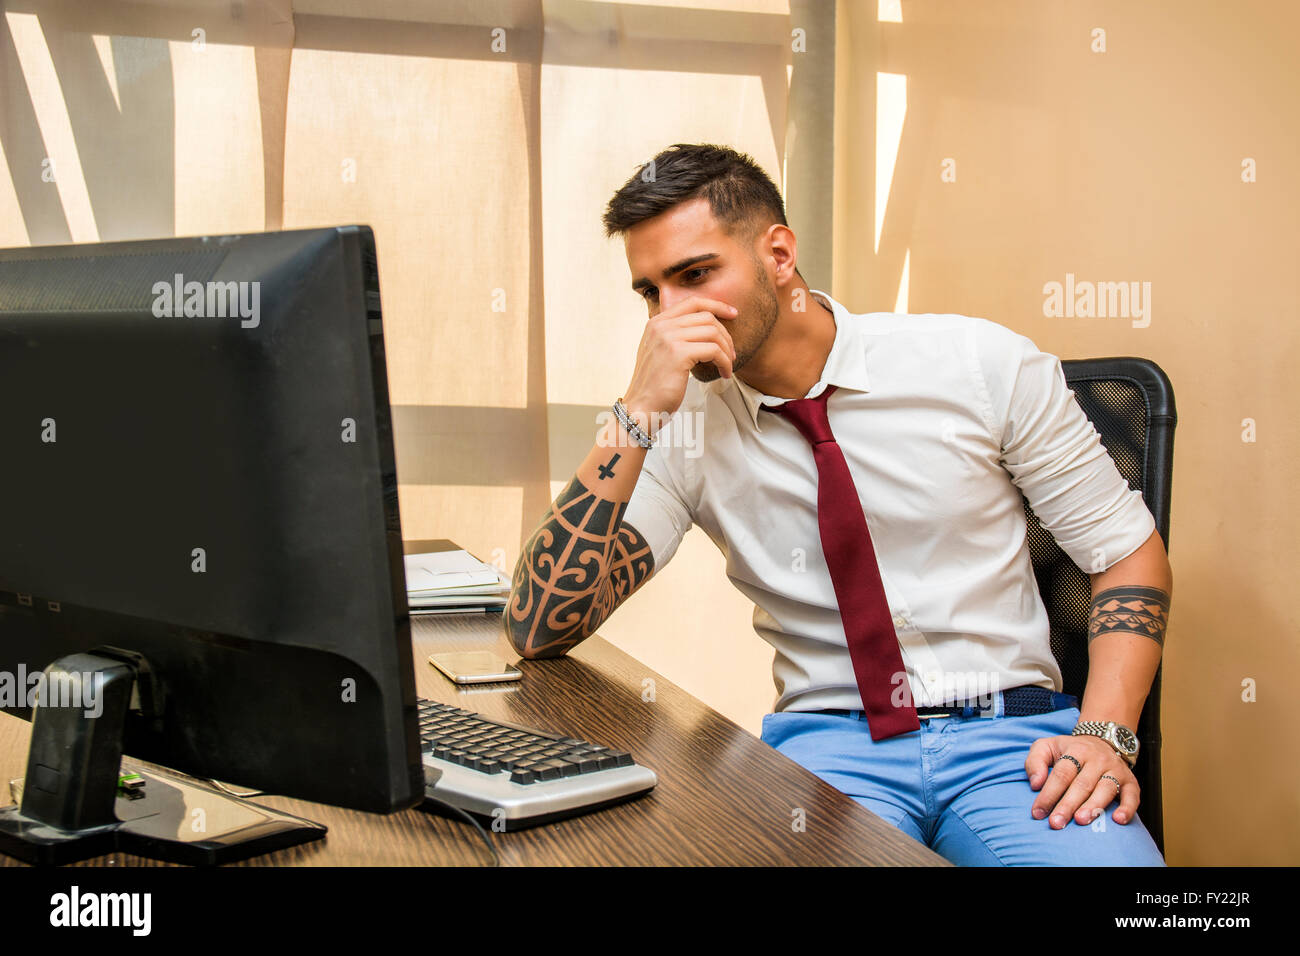 Tired or frustrated, worried young man working in office looking at computer screen Stock Photo